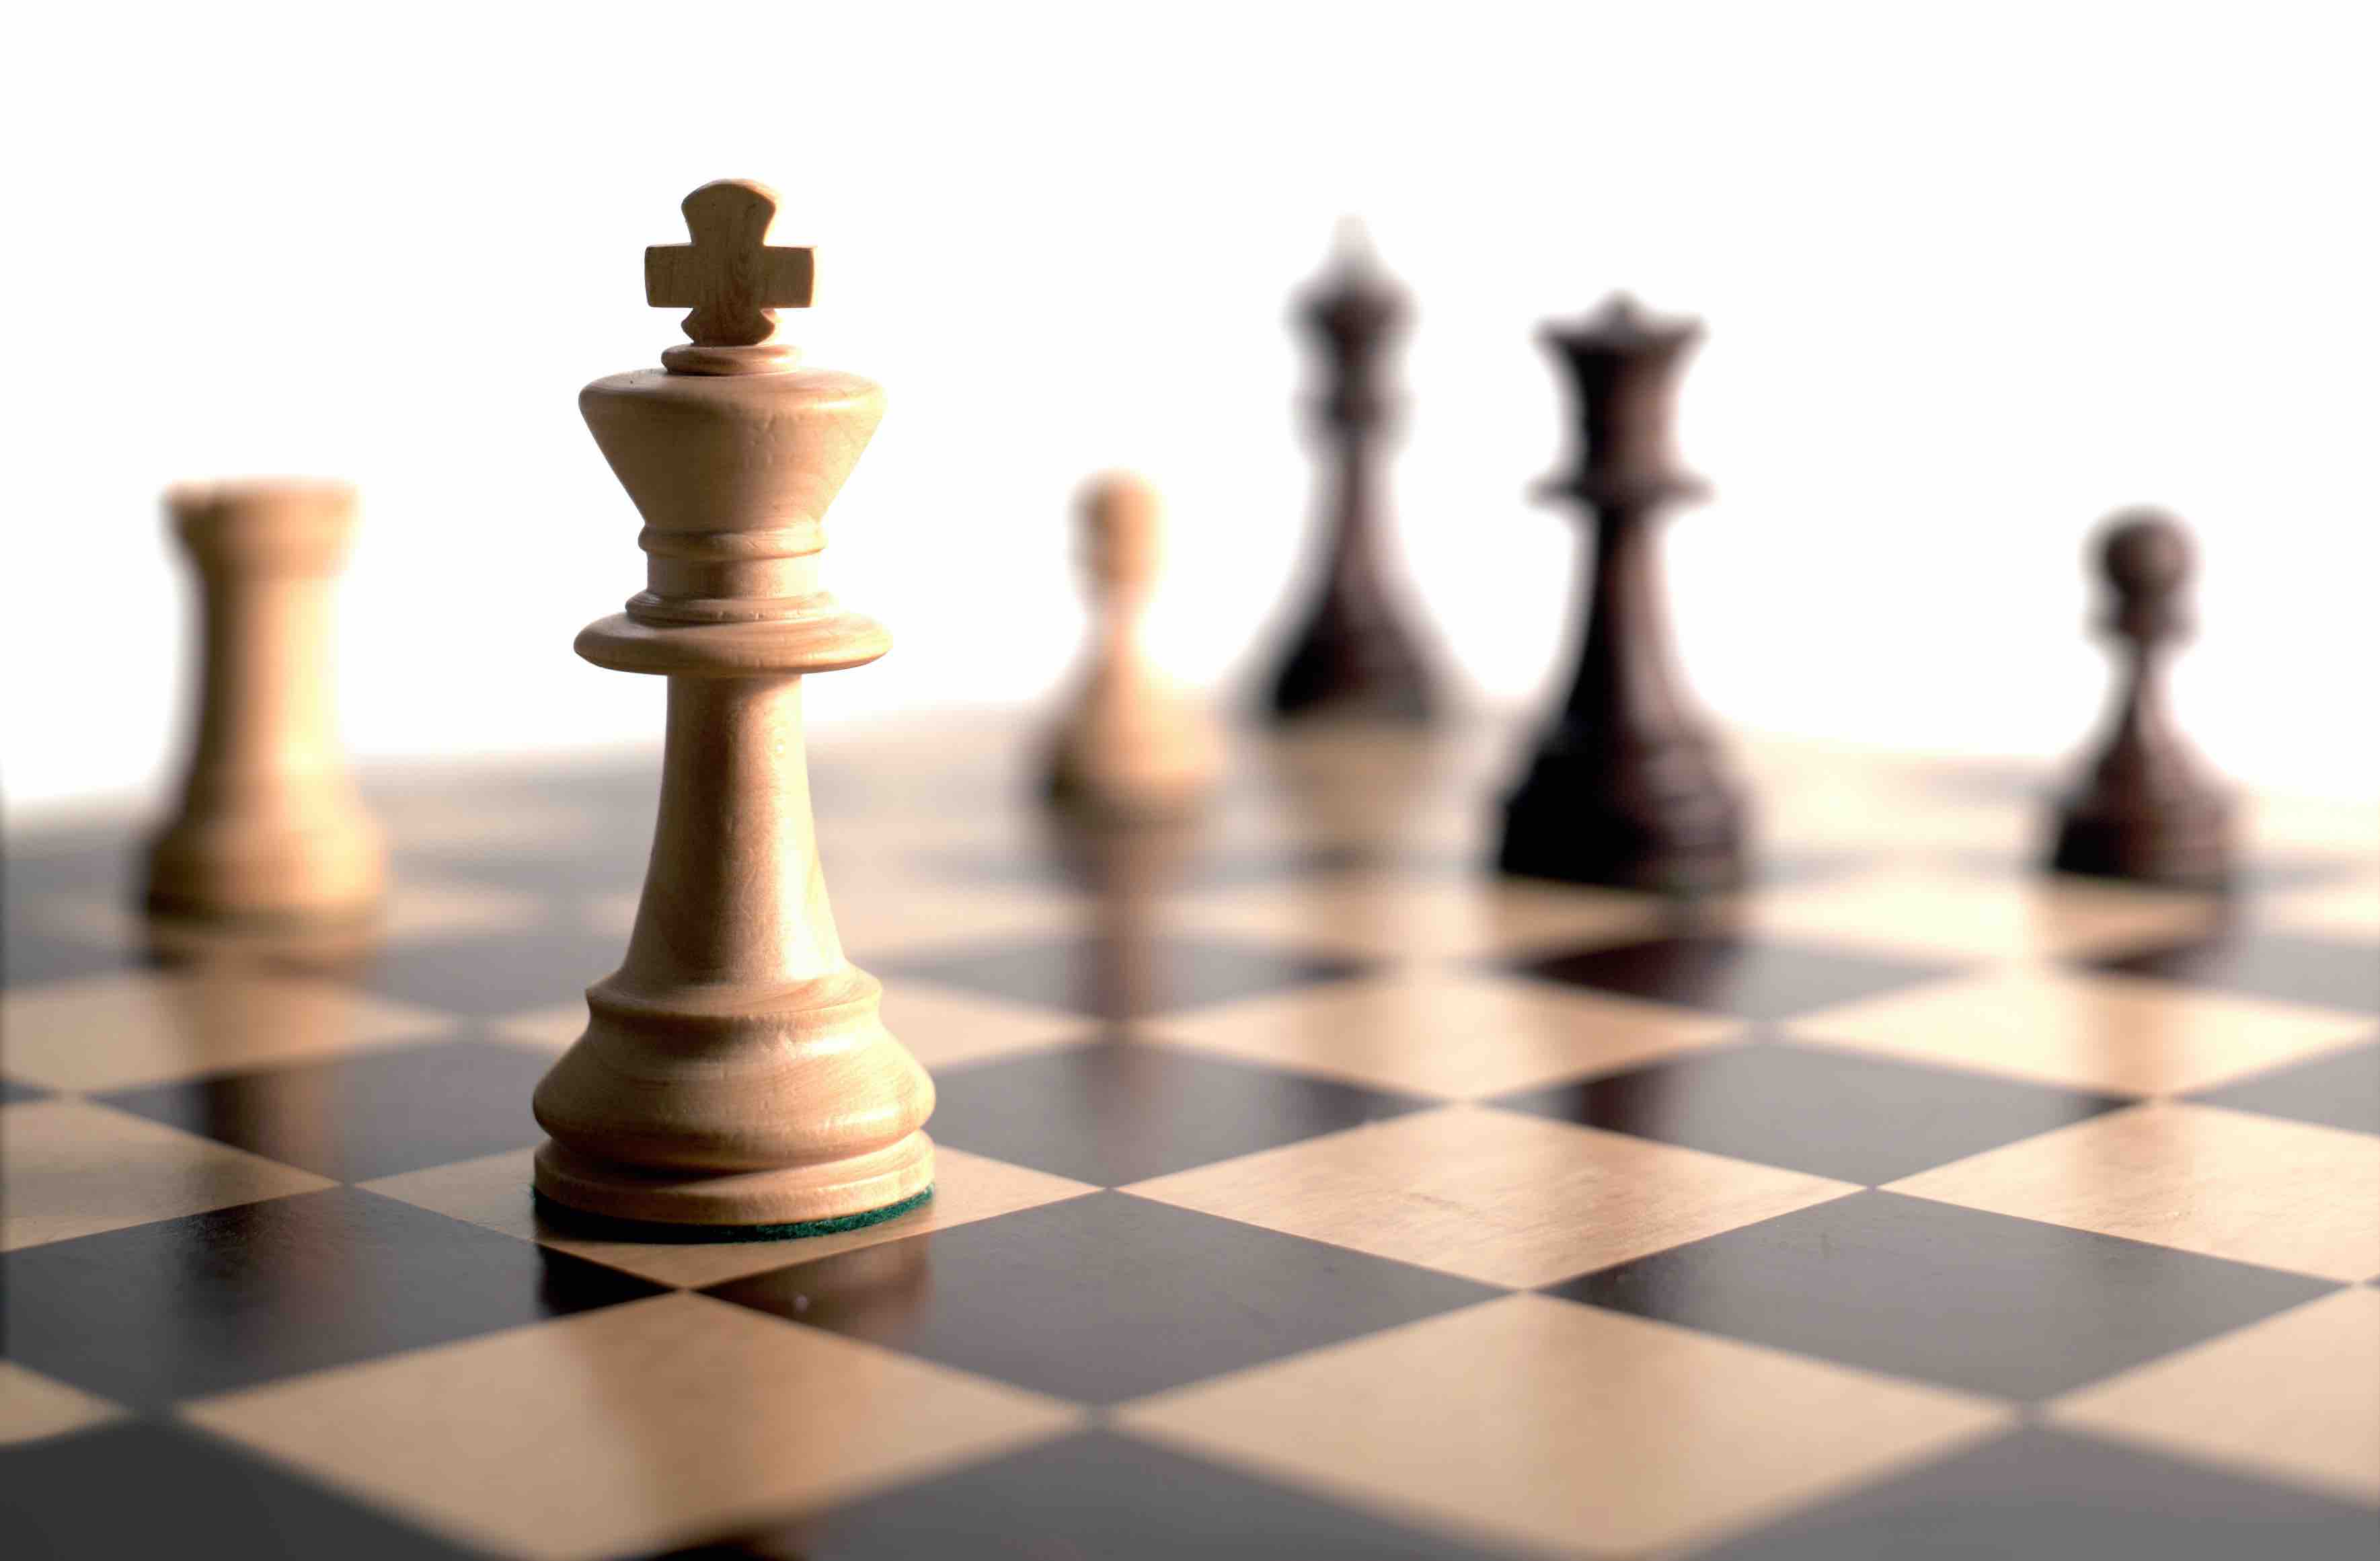 The Rules of Chess – Chess Chivalry